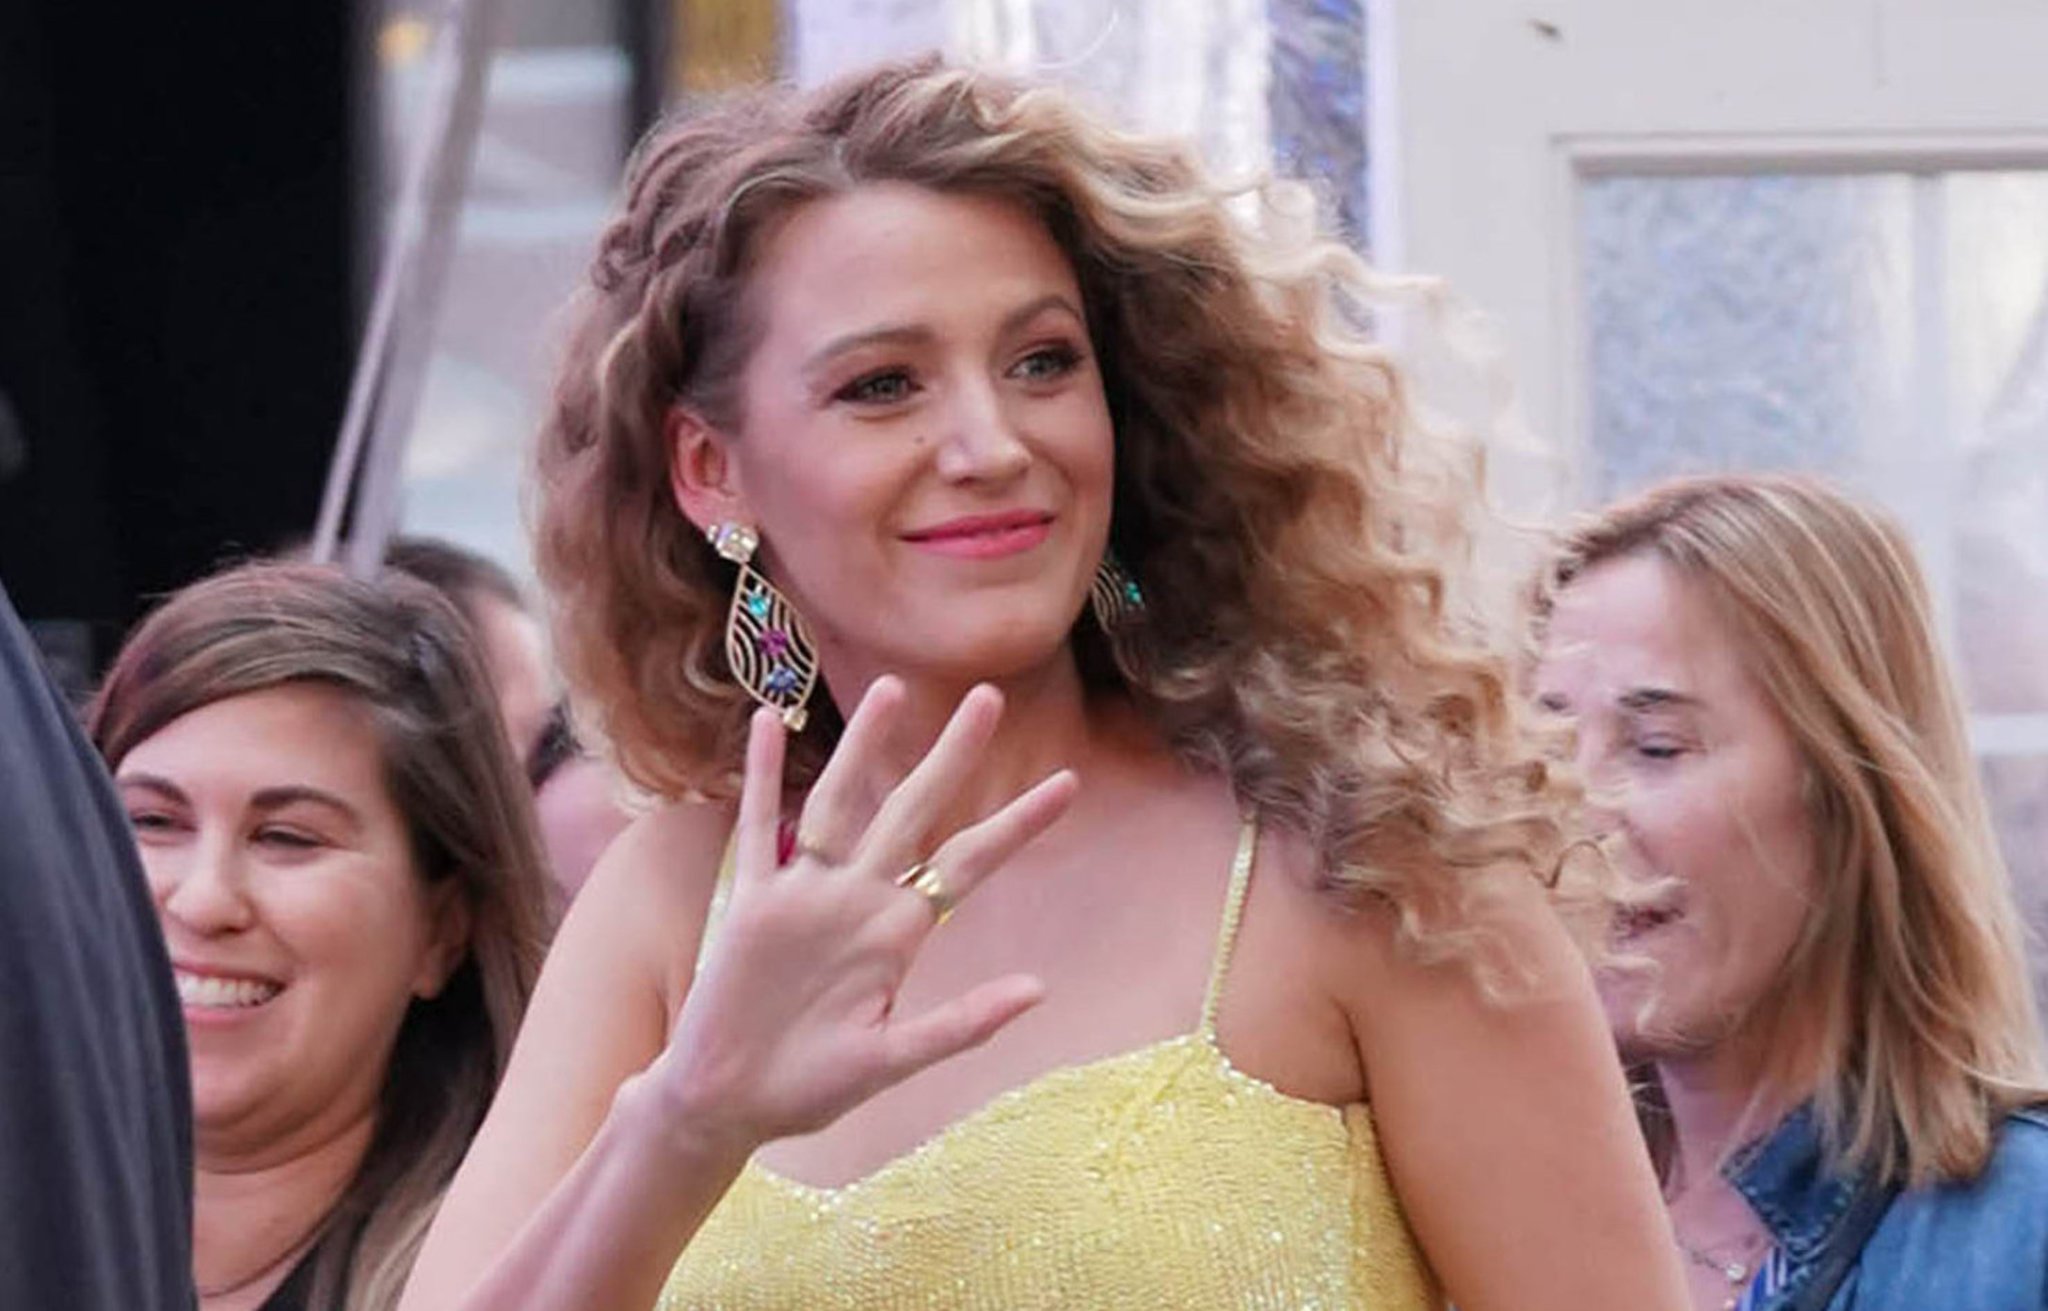 Blake Lively Details Why She Felt 'Insecure' About Her Post-Baby Body